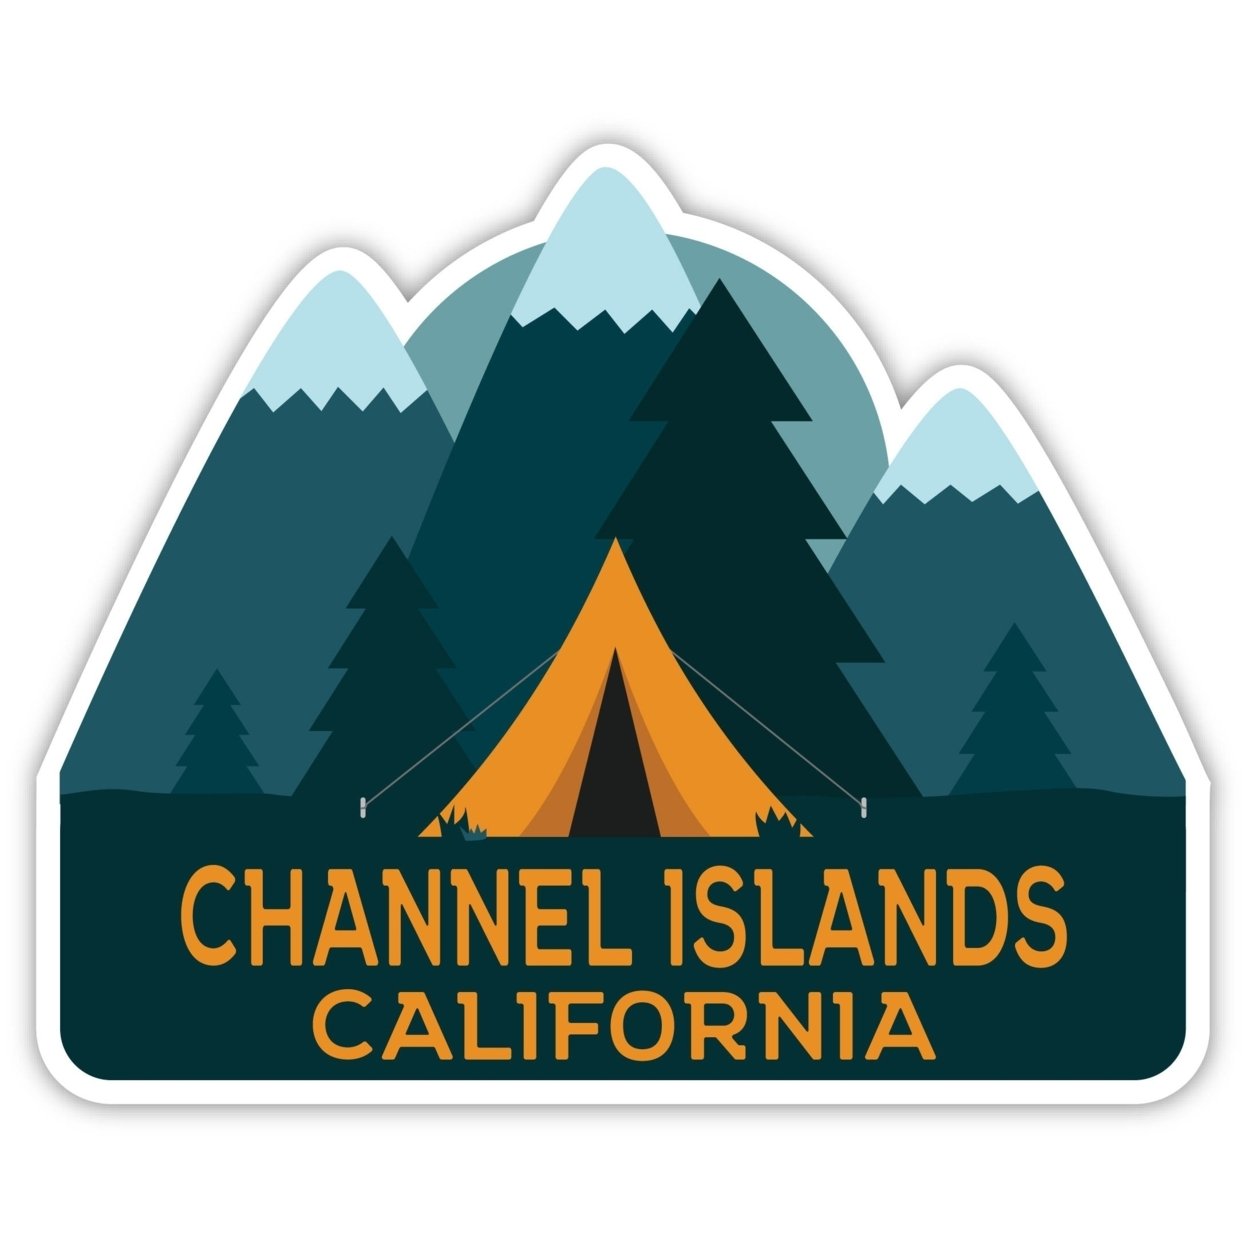 Channel Islands California Souvenir Decorative Stickers (Choose Theme And Size) - 4-Pack, 8-Inch, Tent